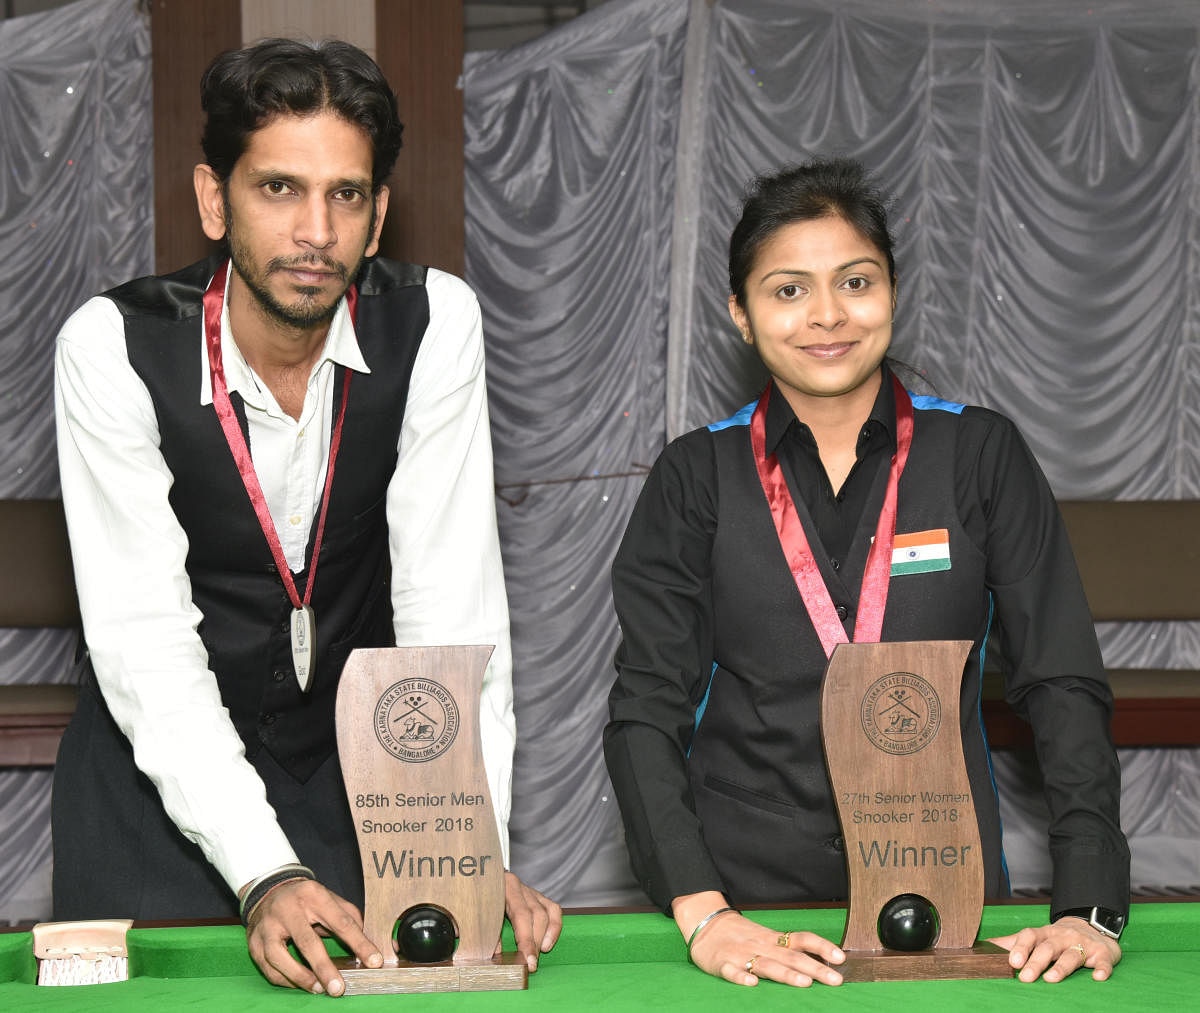 DELIGHTED: Sumit Talwar (left) and Amee Kamani, winners of the men's and women's National Snooker titles in Bengaluru on Saturday. DH Photo